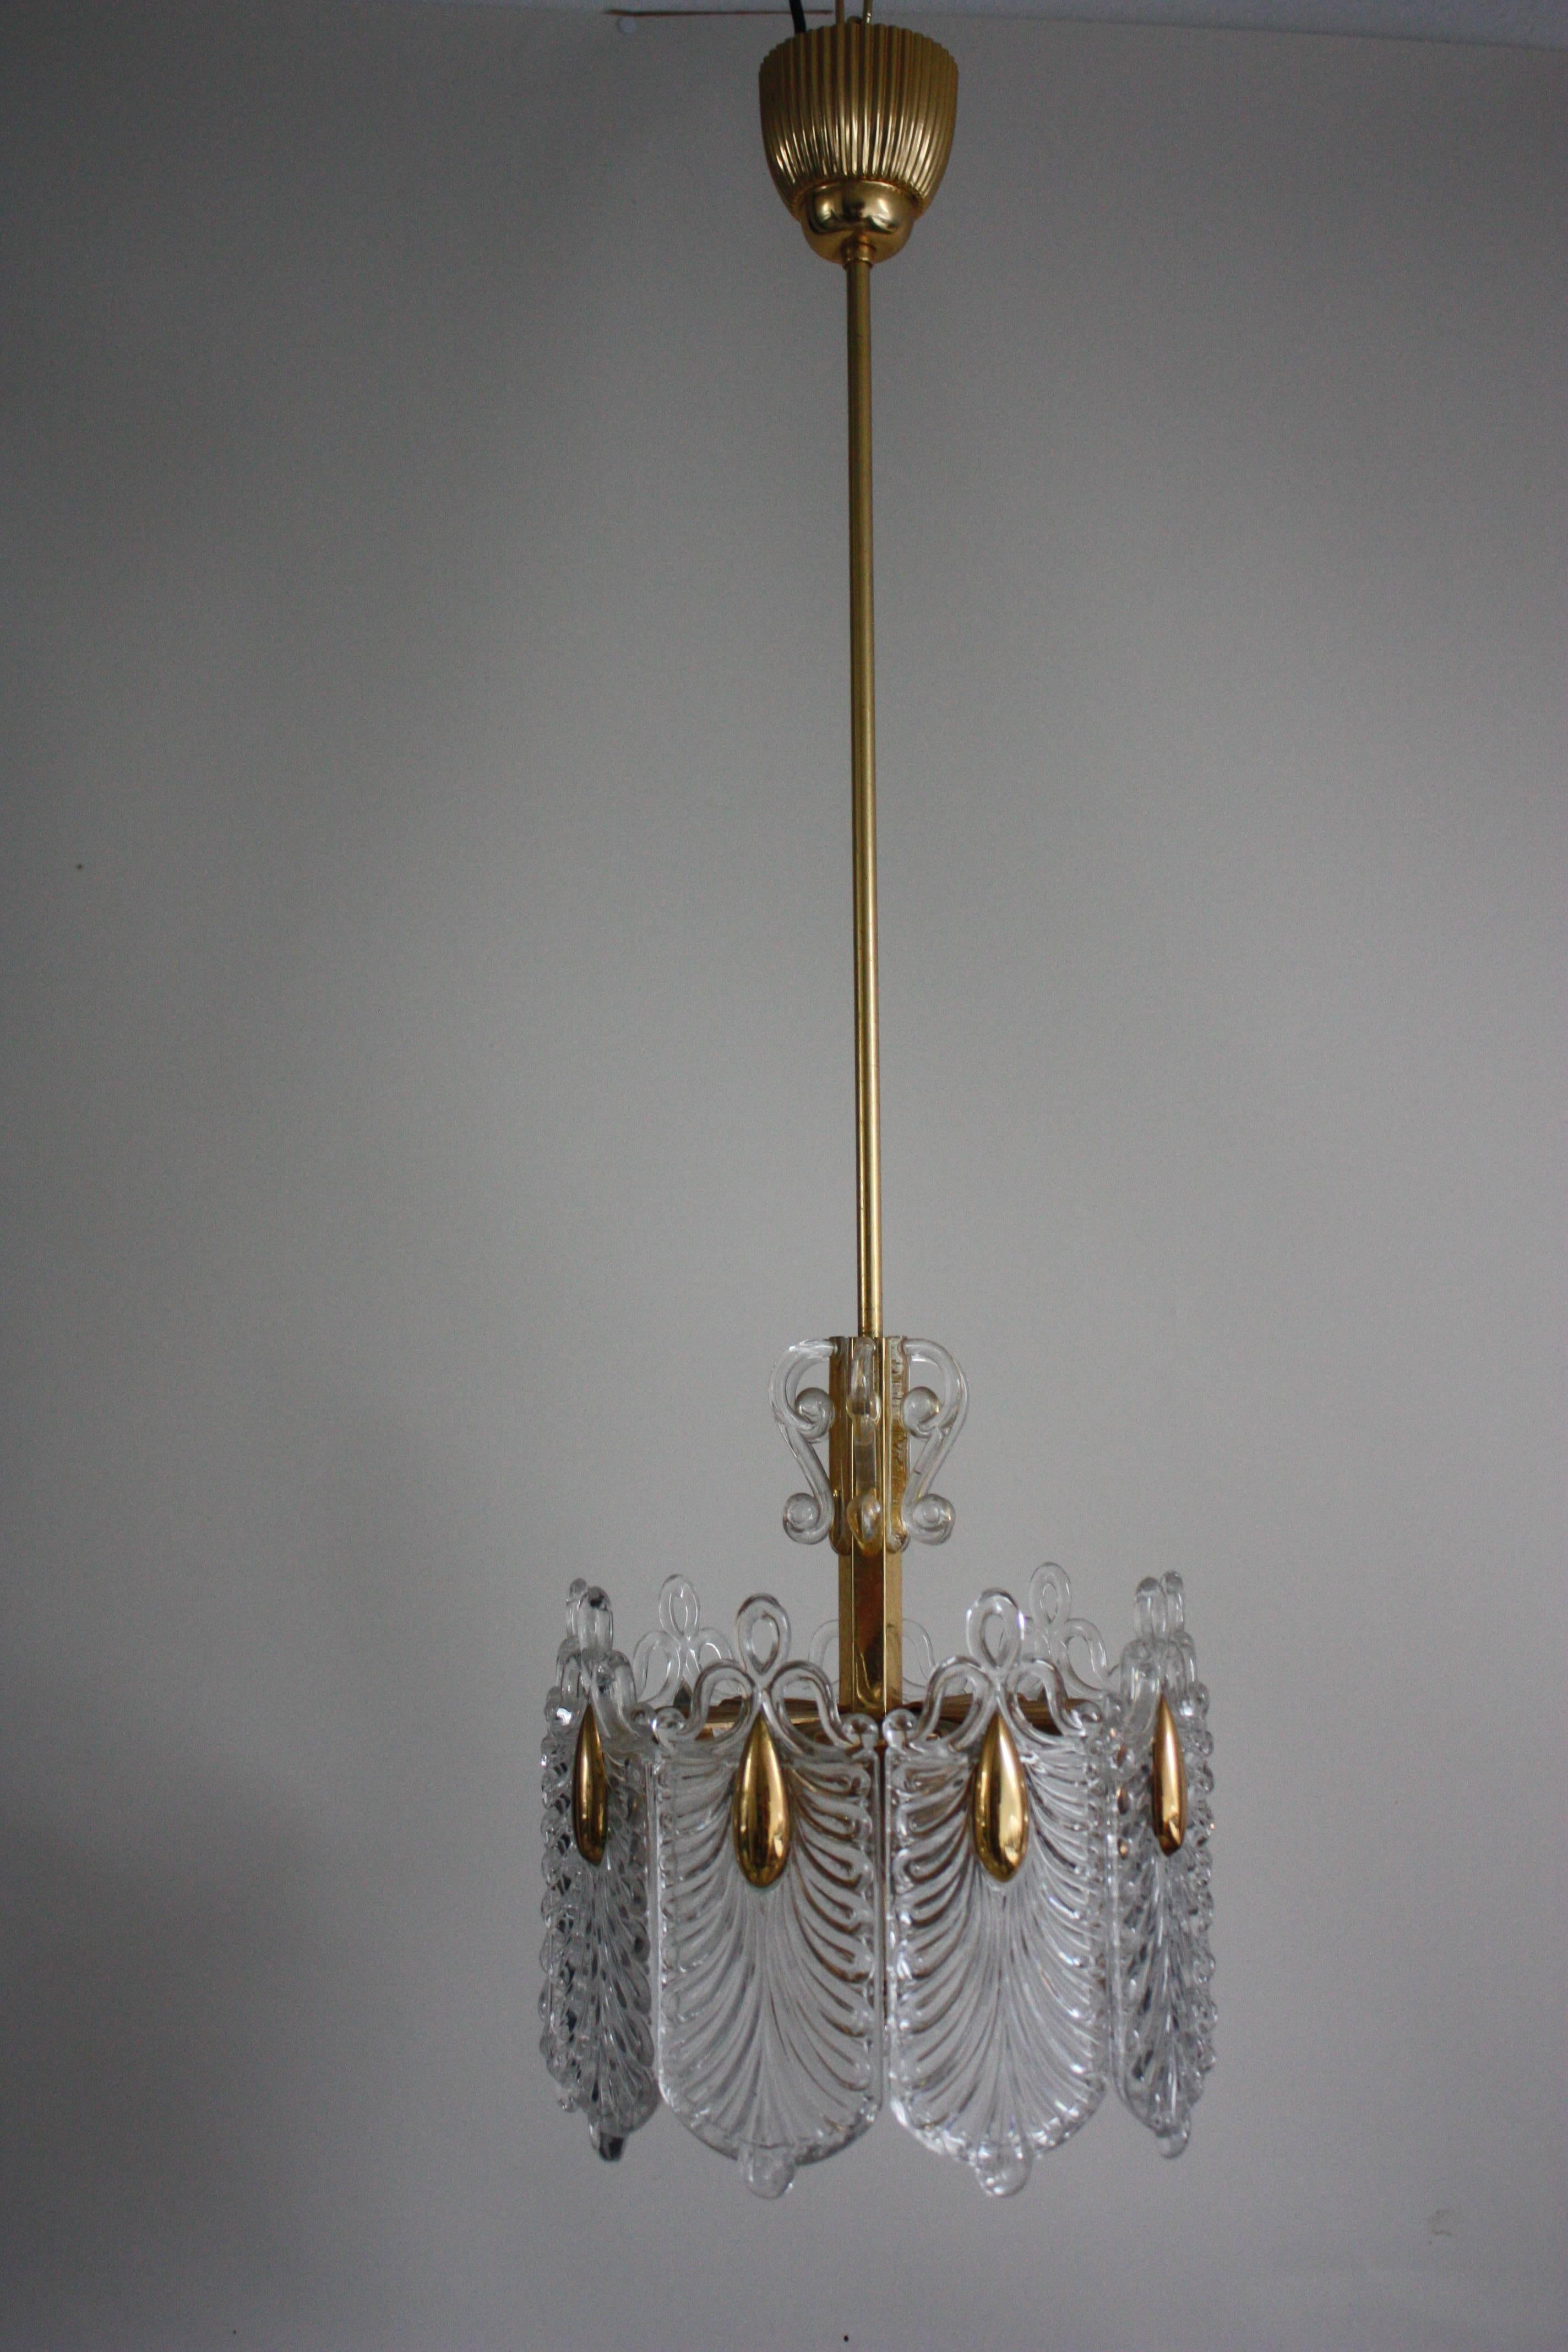 A fin, elegant mid-century three-light glass chandelier by Kaiser, Germany, circa 1960s.
Made of gilt brass and metal frame with textured clear glass.
Sockets: 3 x e27 for standard screw bulbs. Rewired for US.